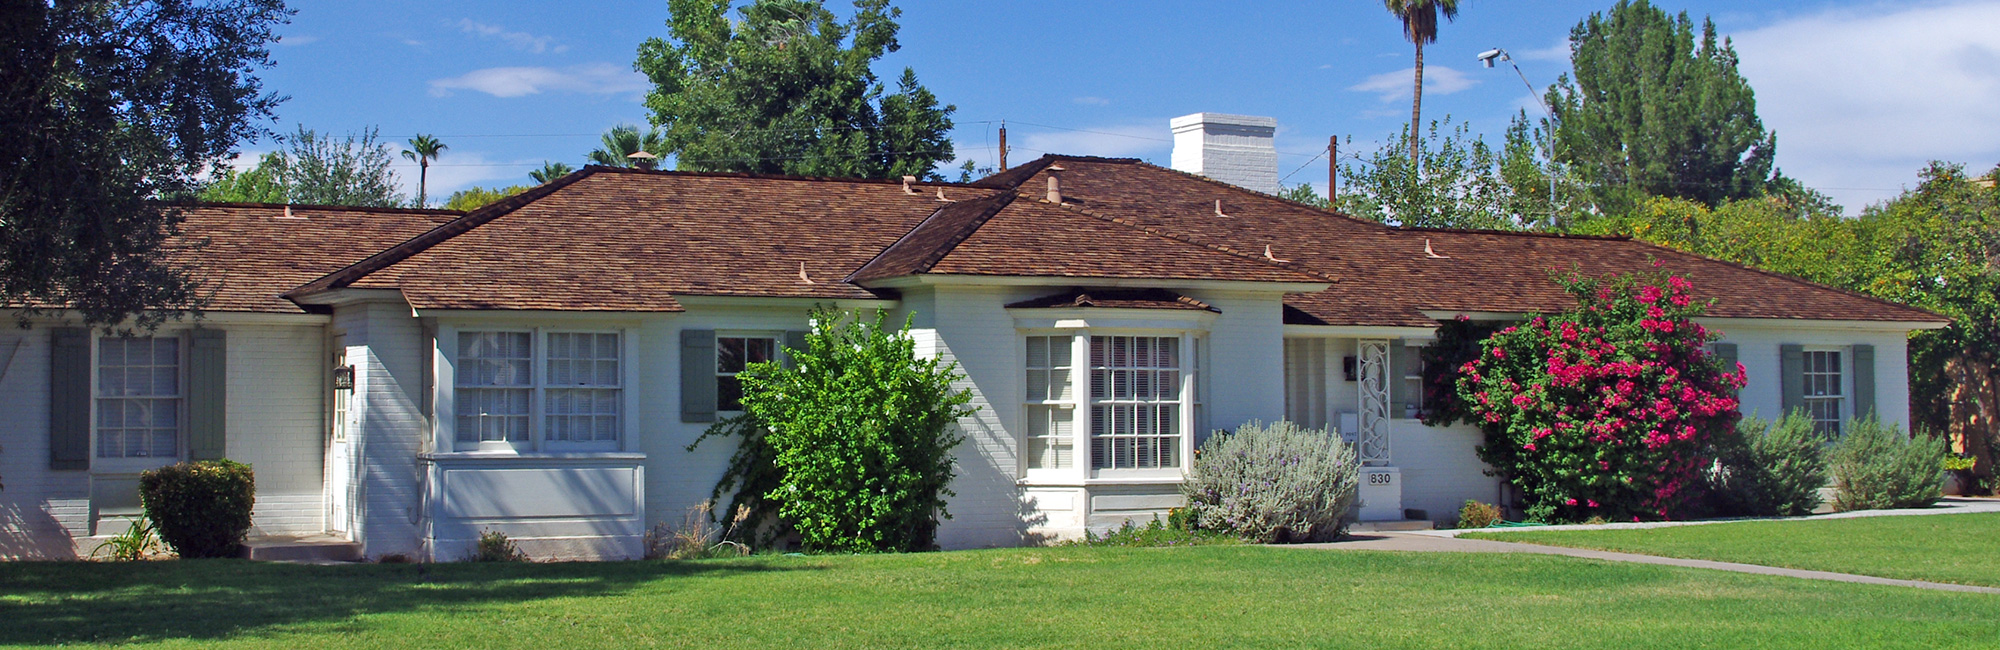 Country Club Park Historic District of Phoenix